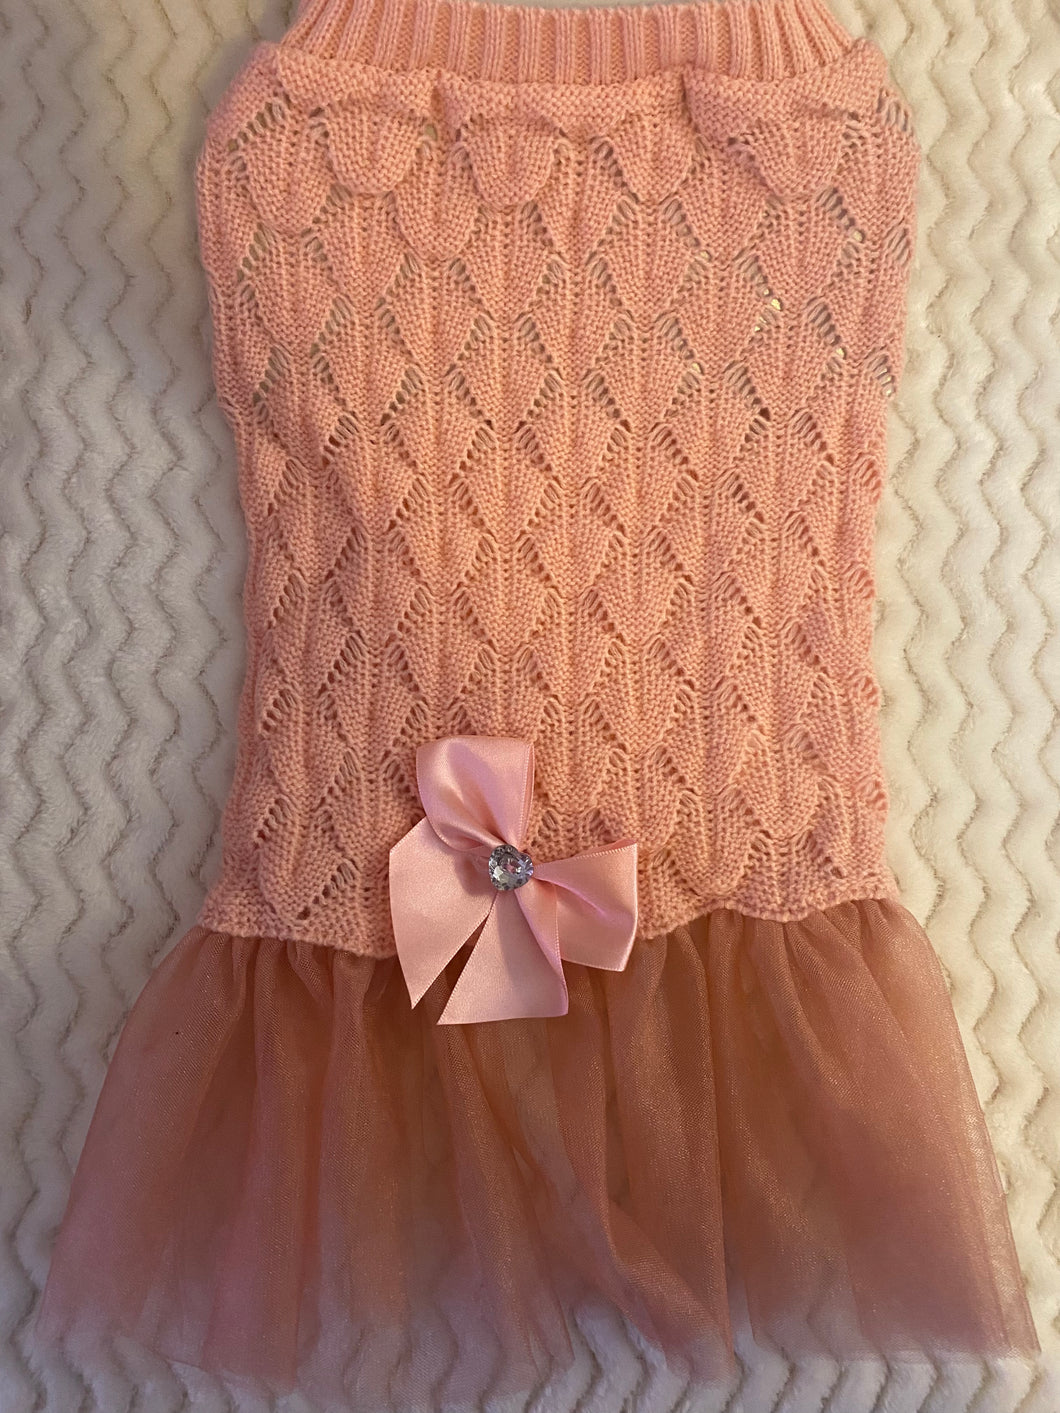 Chic and cute pink sweater dress